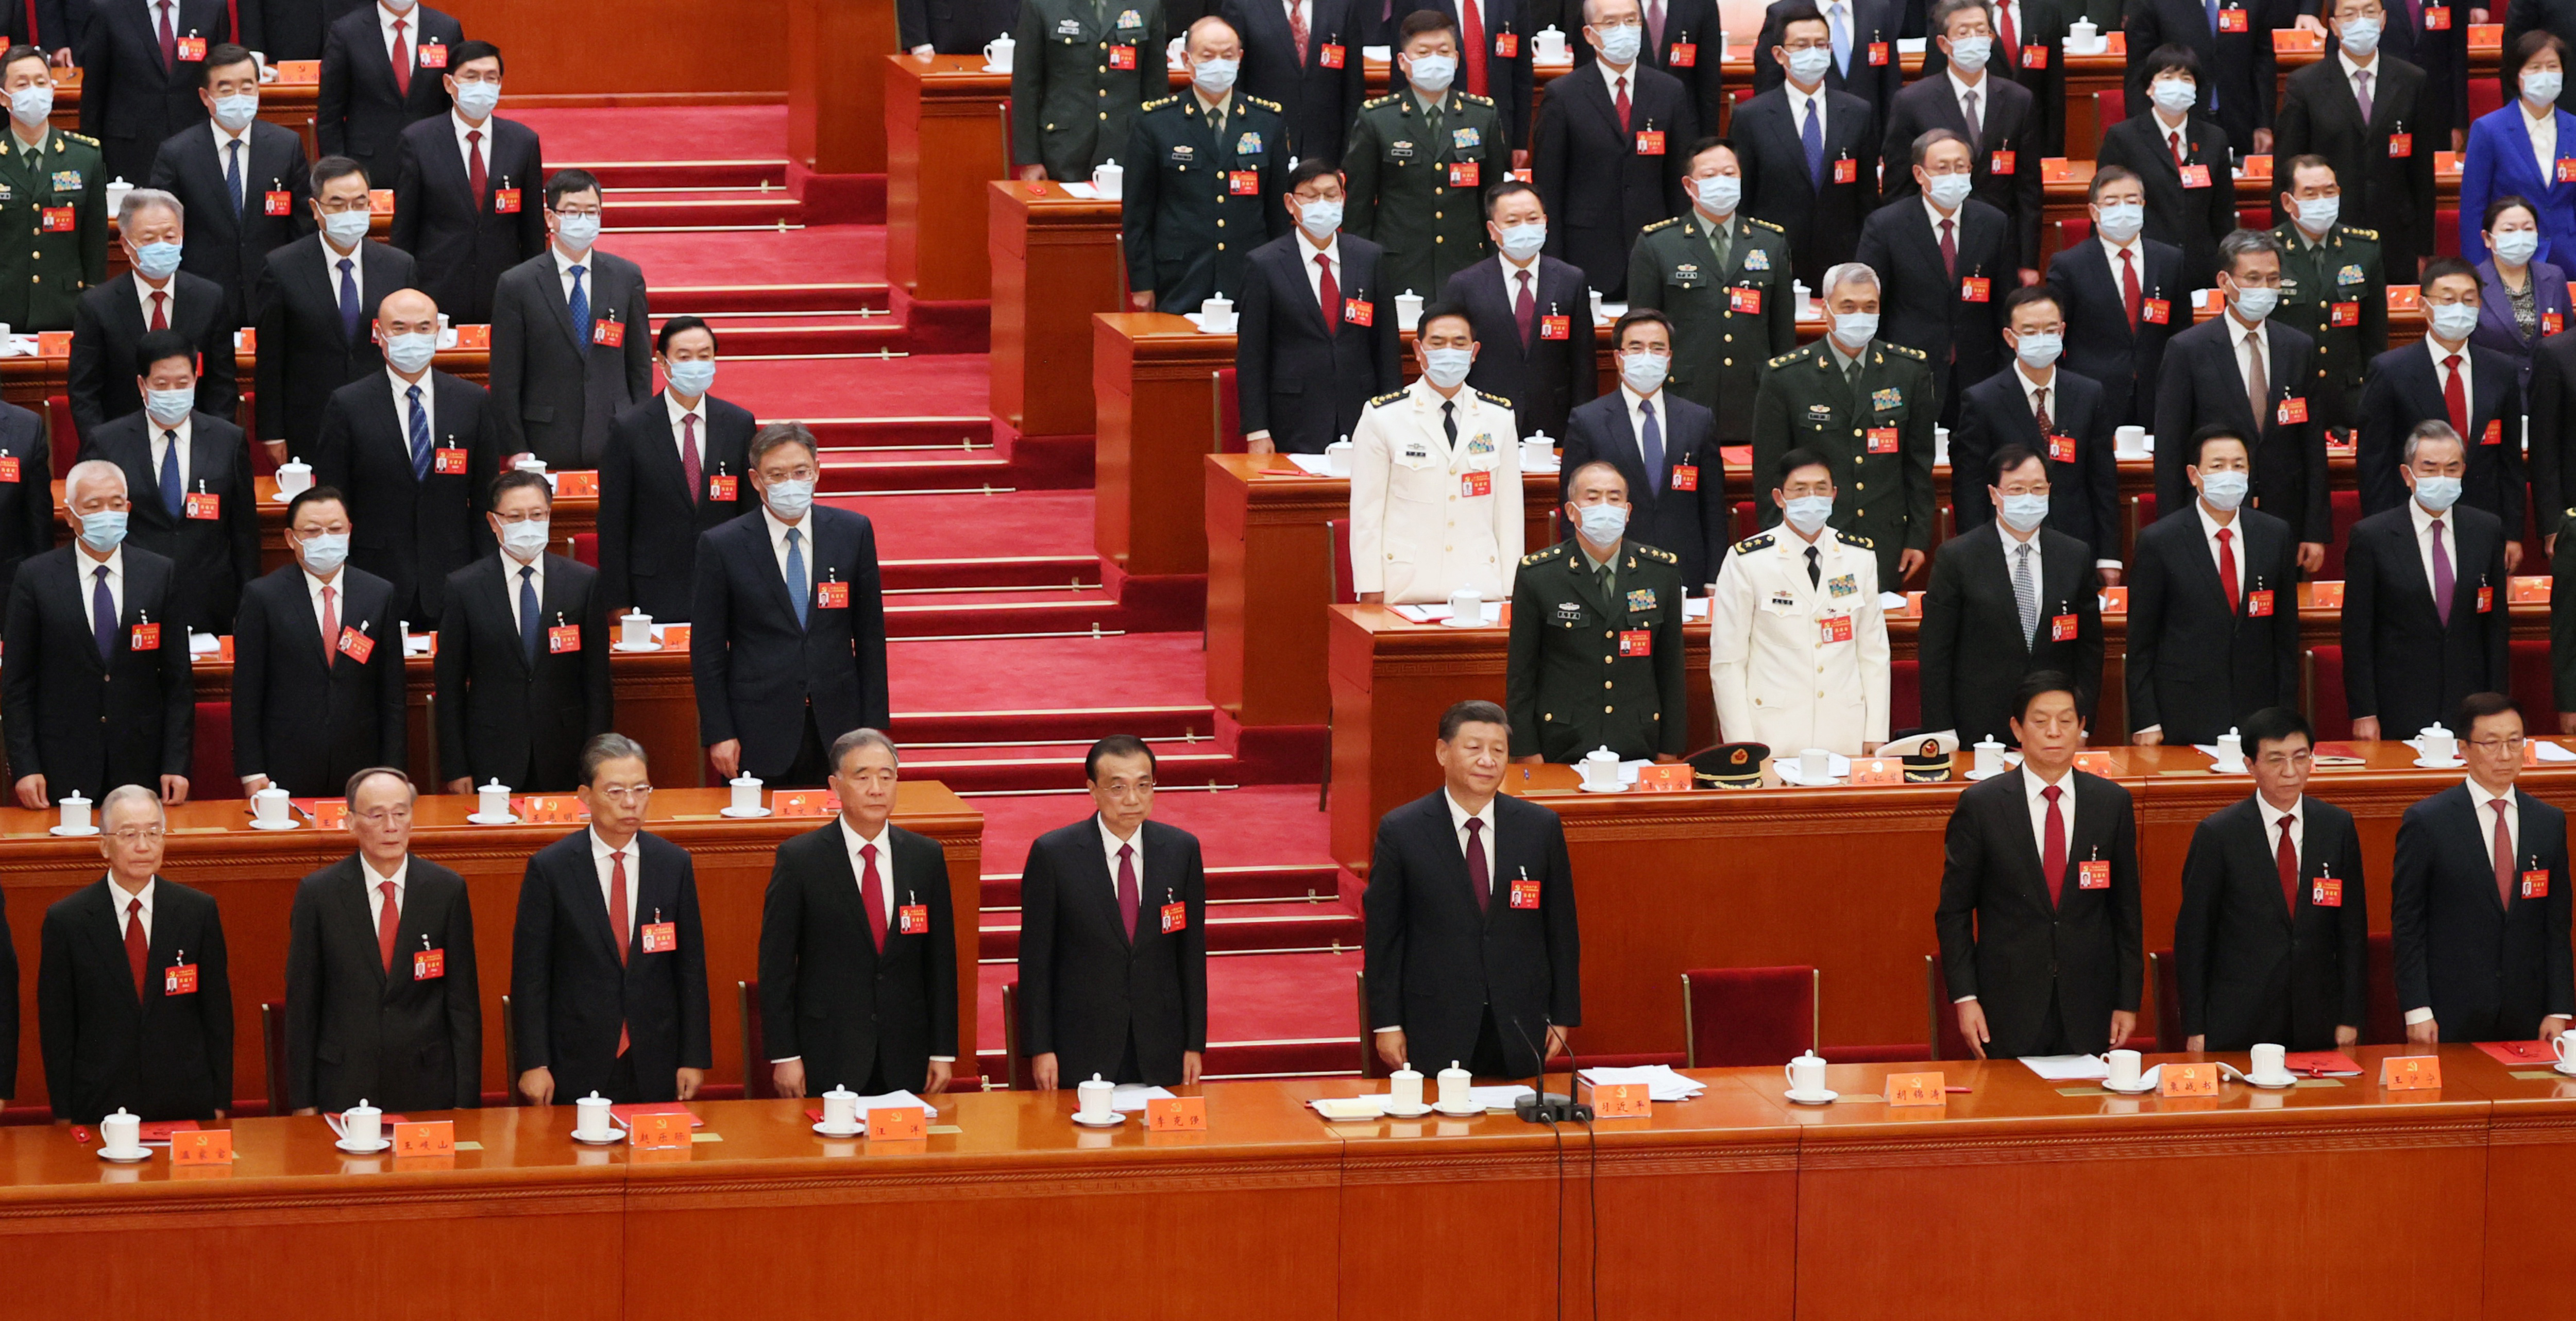 Chinese President Xi Jinping (C)  speaks during the closing ceremony of the 20th National Congress of the Communist Party of China at the Great Hall of the People in Beijing, Oct. 22, 2022. China's Communist Party wrapped up its the congress which has cemented 69-year-old Xi Jinping's third term since Mao Zedong, the founding leader of the People's Republic .( The Yomiuri Shimbun )